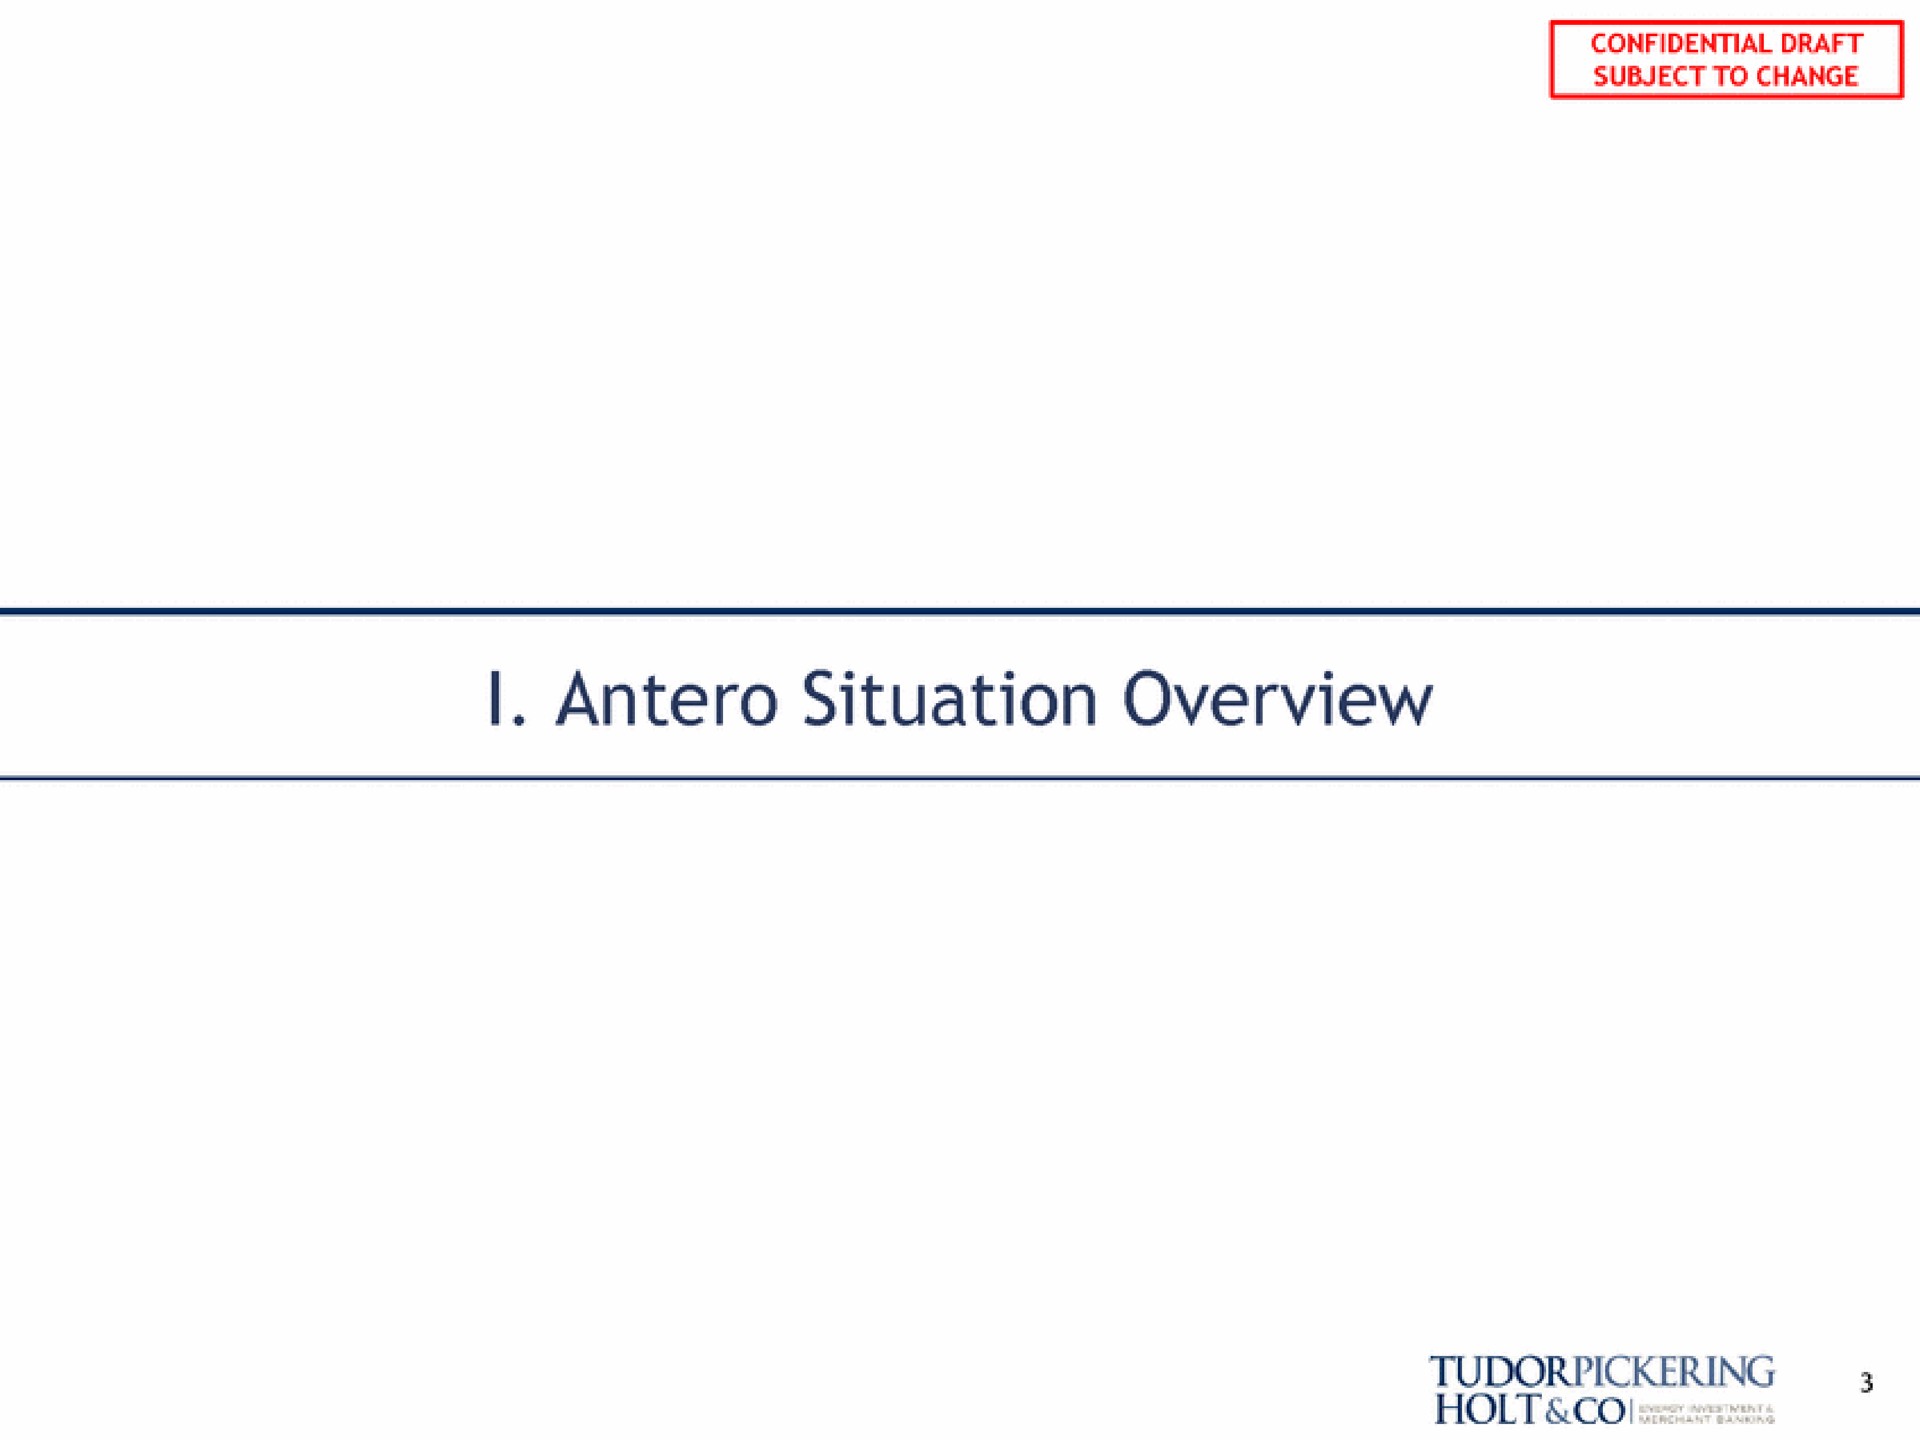 situation overview | Tudor, Pickering, Holt & Co